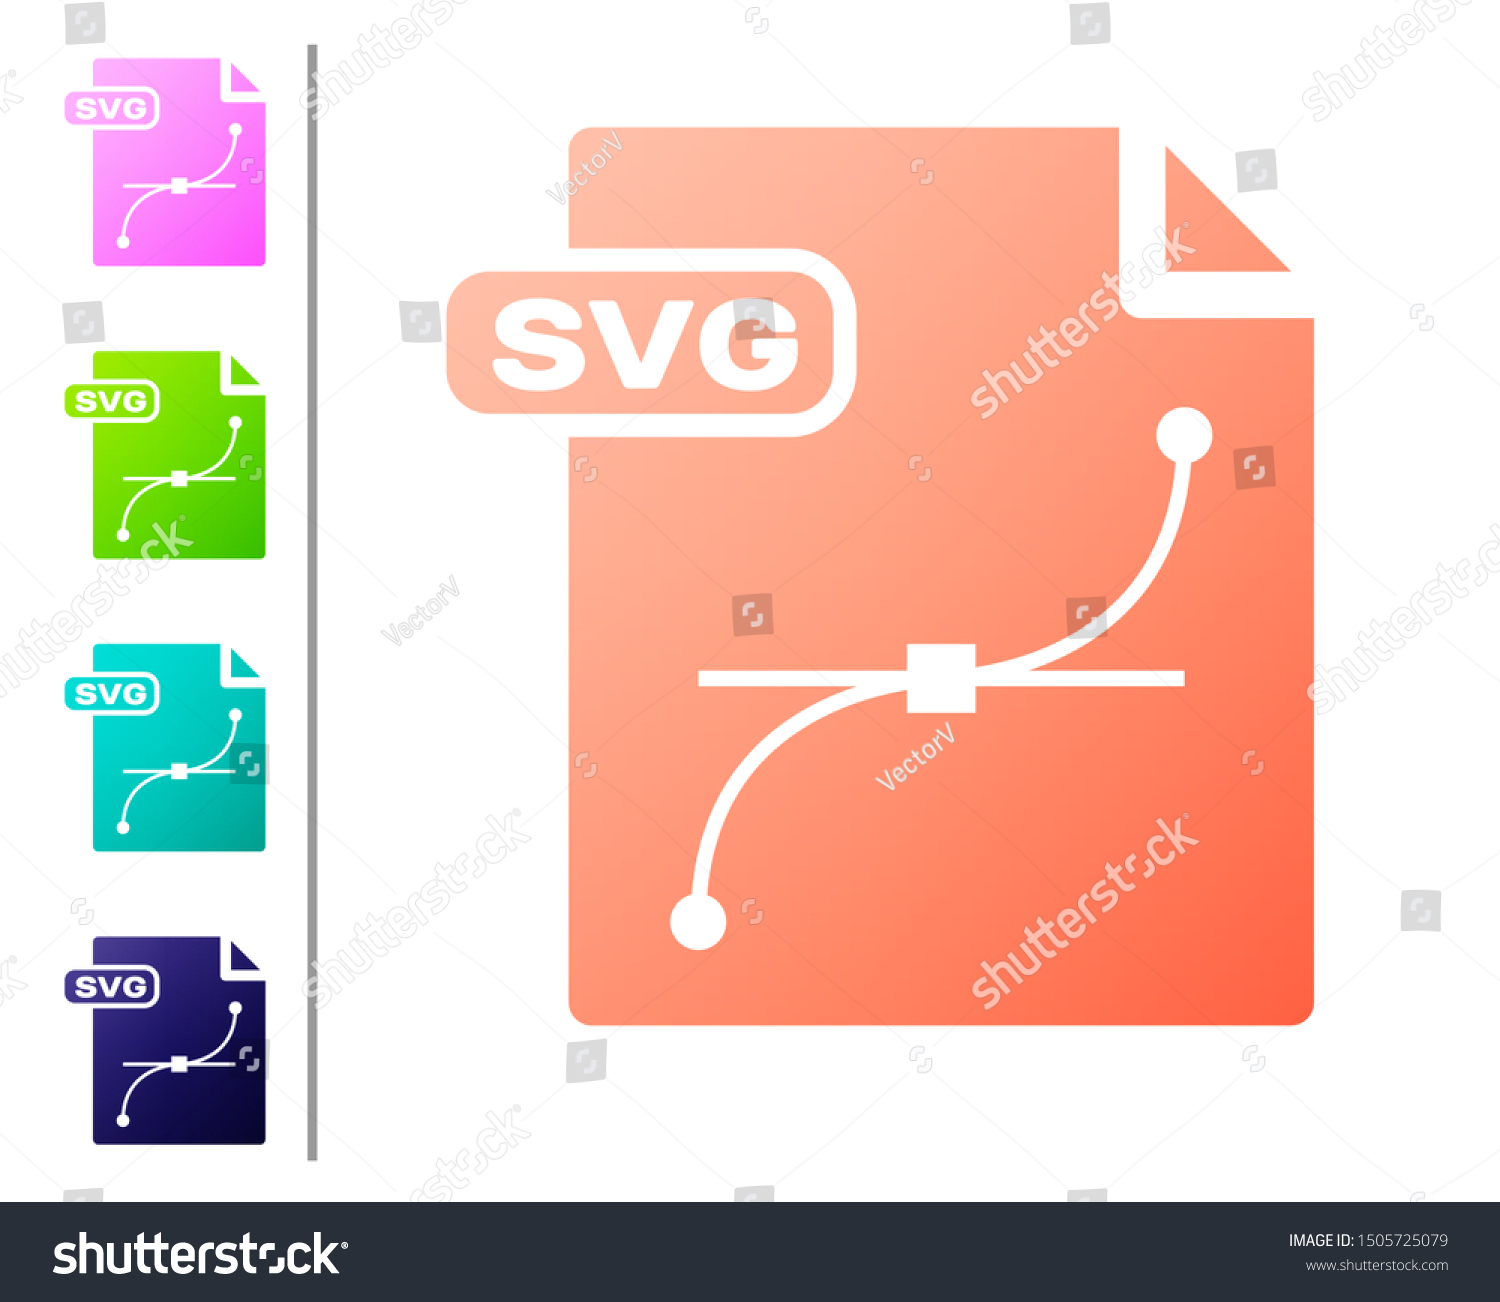 SVG of Coral SVG file document. Download svg button icon isolated on white background. SVG file symbol. Set color icons. Vector Illustration svg